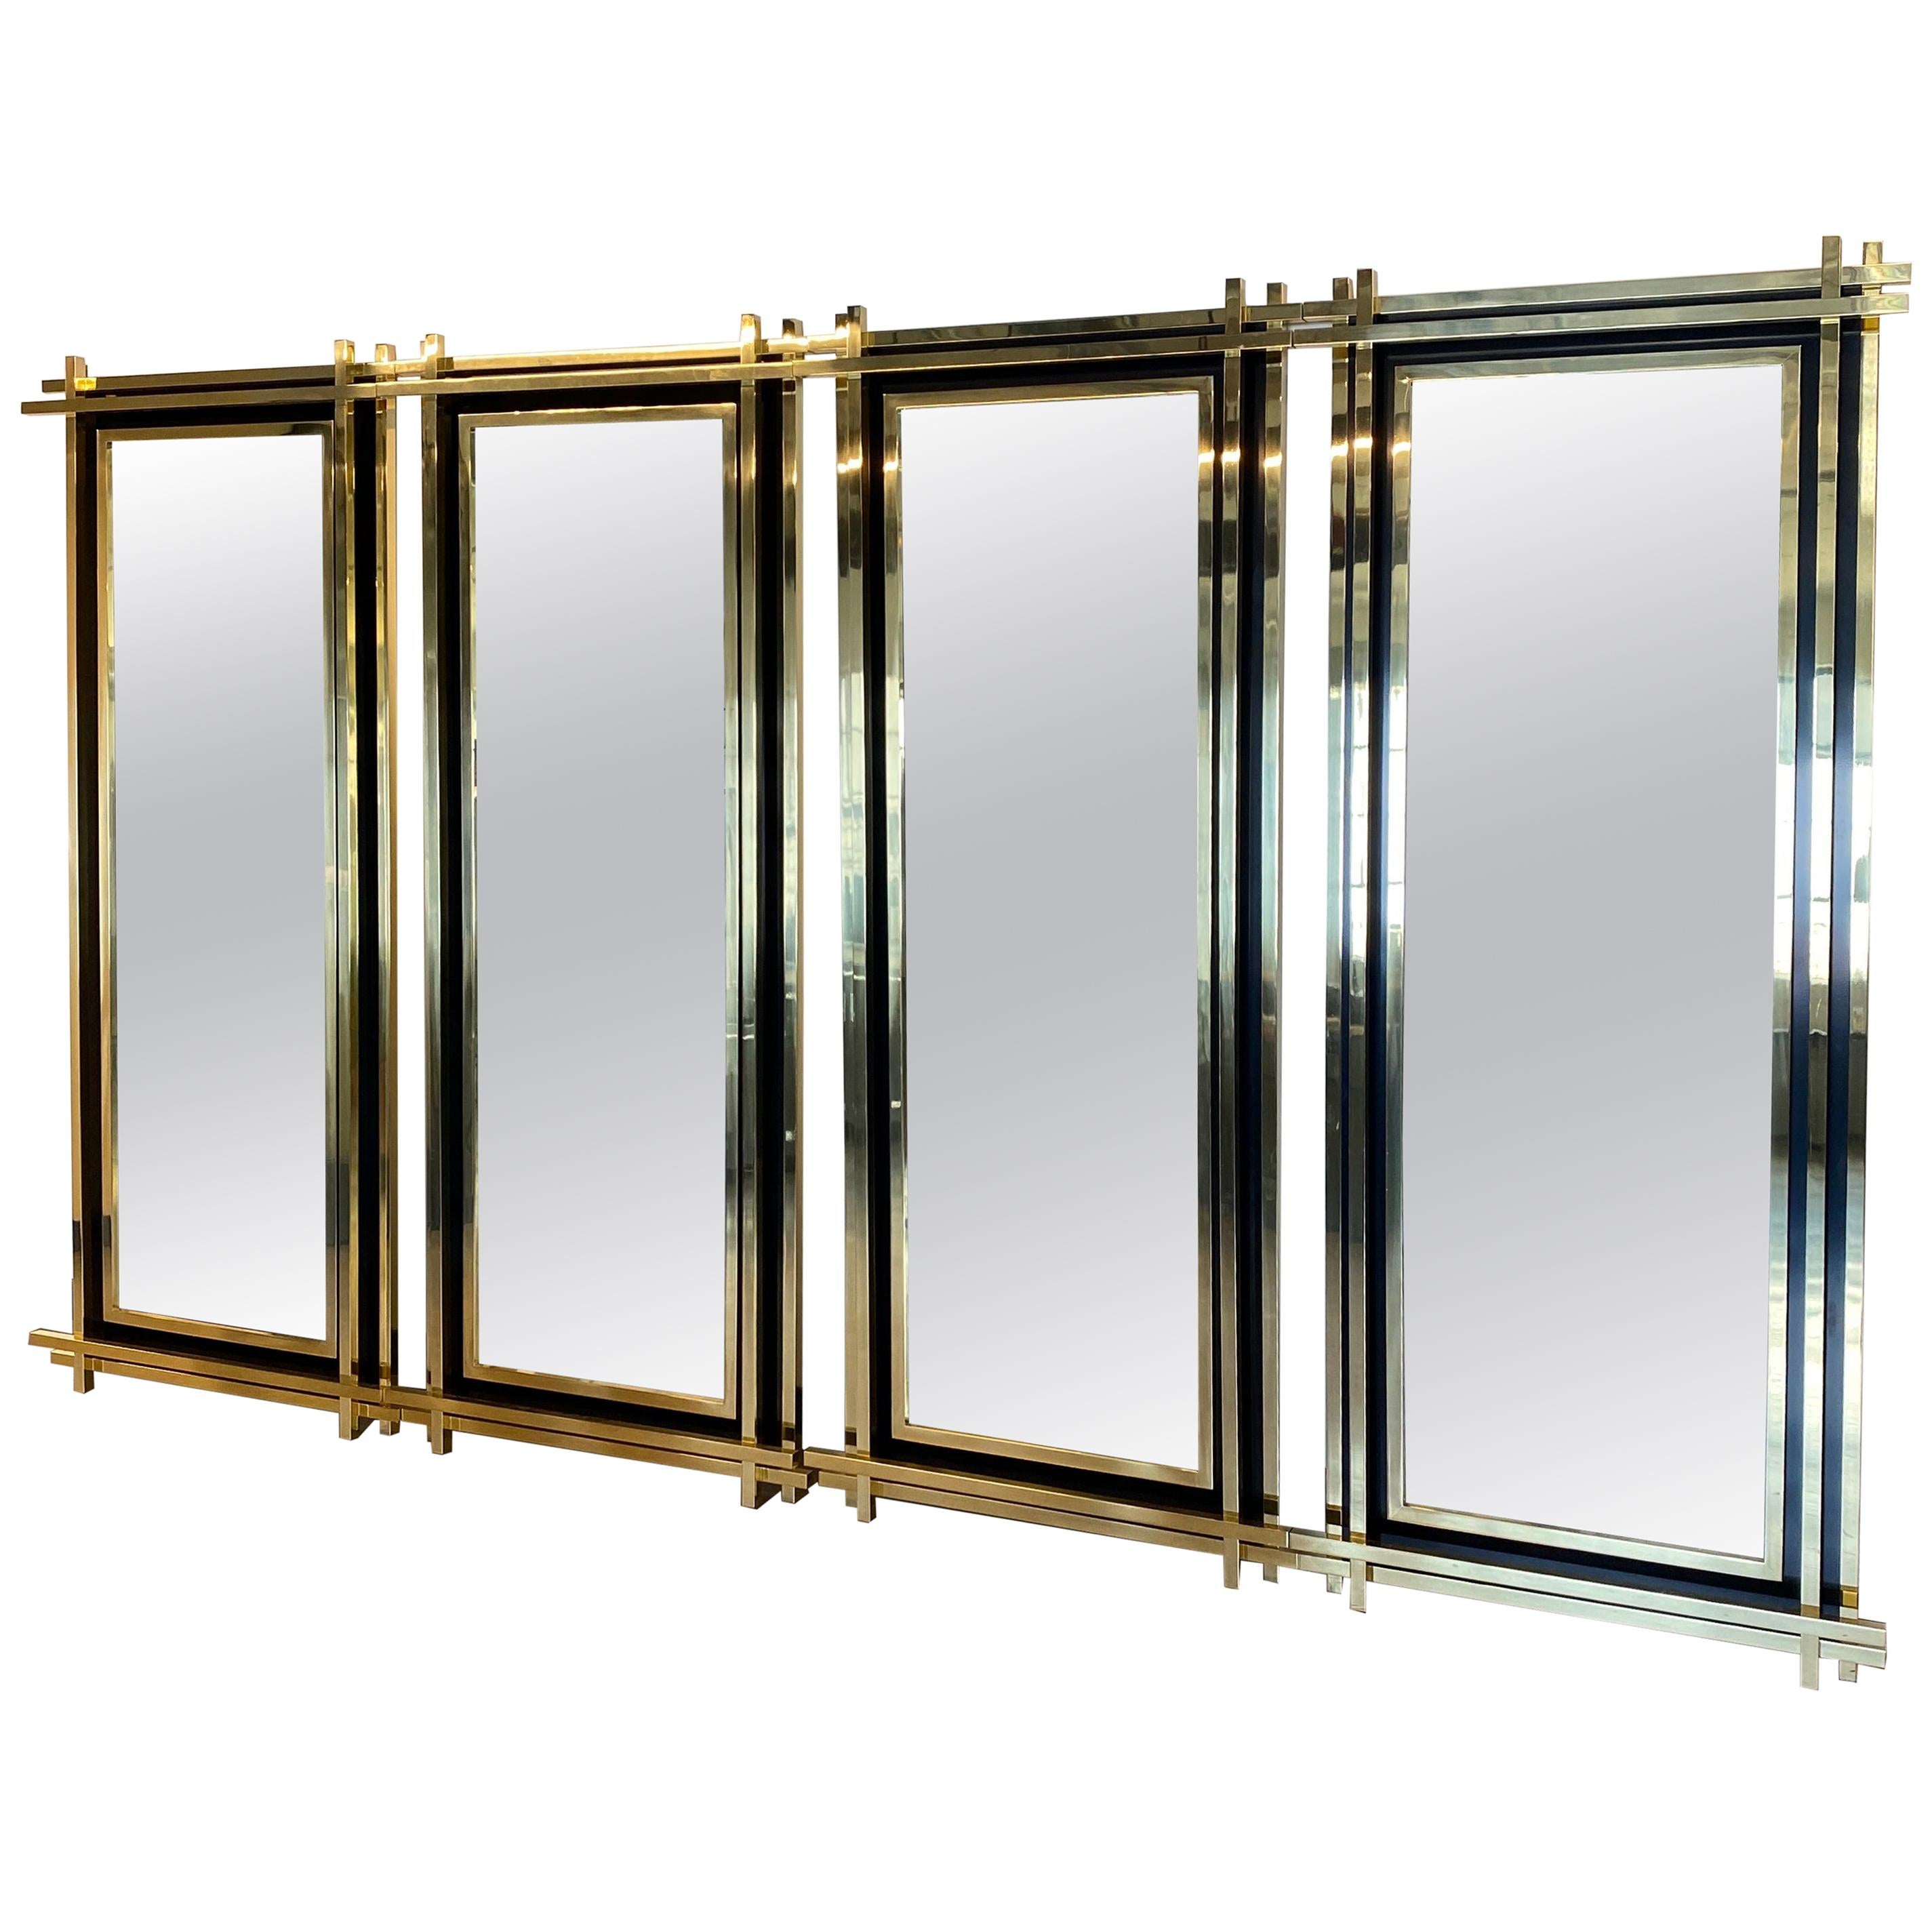 Limited set of 4 custom made full length Mid-Century Modern brass floor mirror, Italy.

The 4 mirrors are made in Italy in 2018 and was a special one of a kind custom made limited edition by the finest Italian designer and craftsmen.

There are